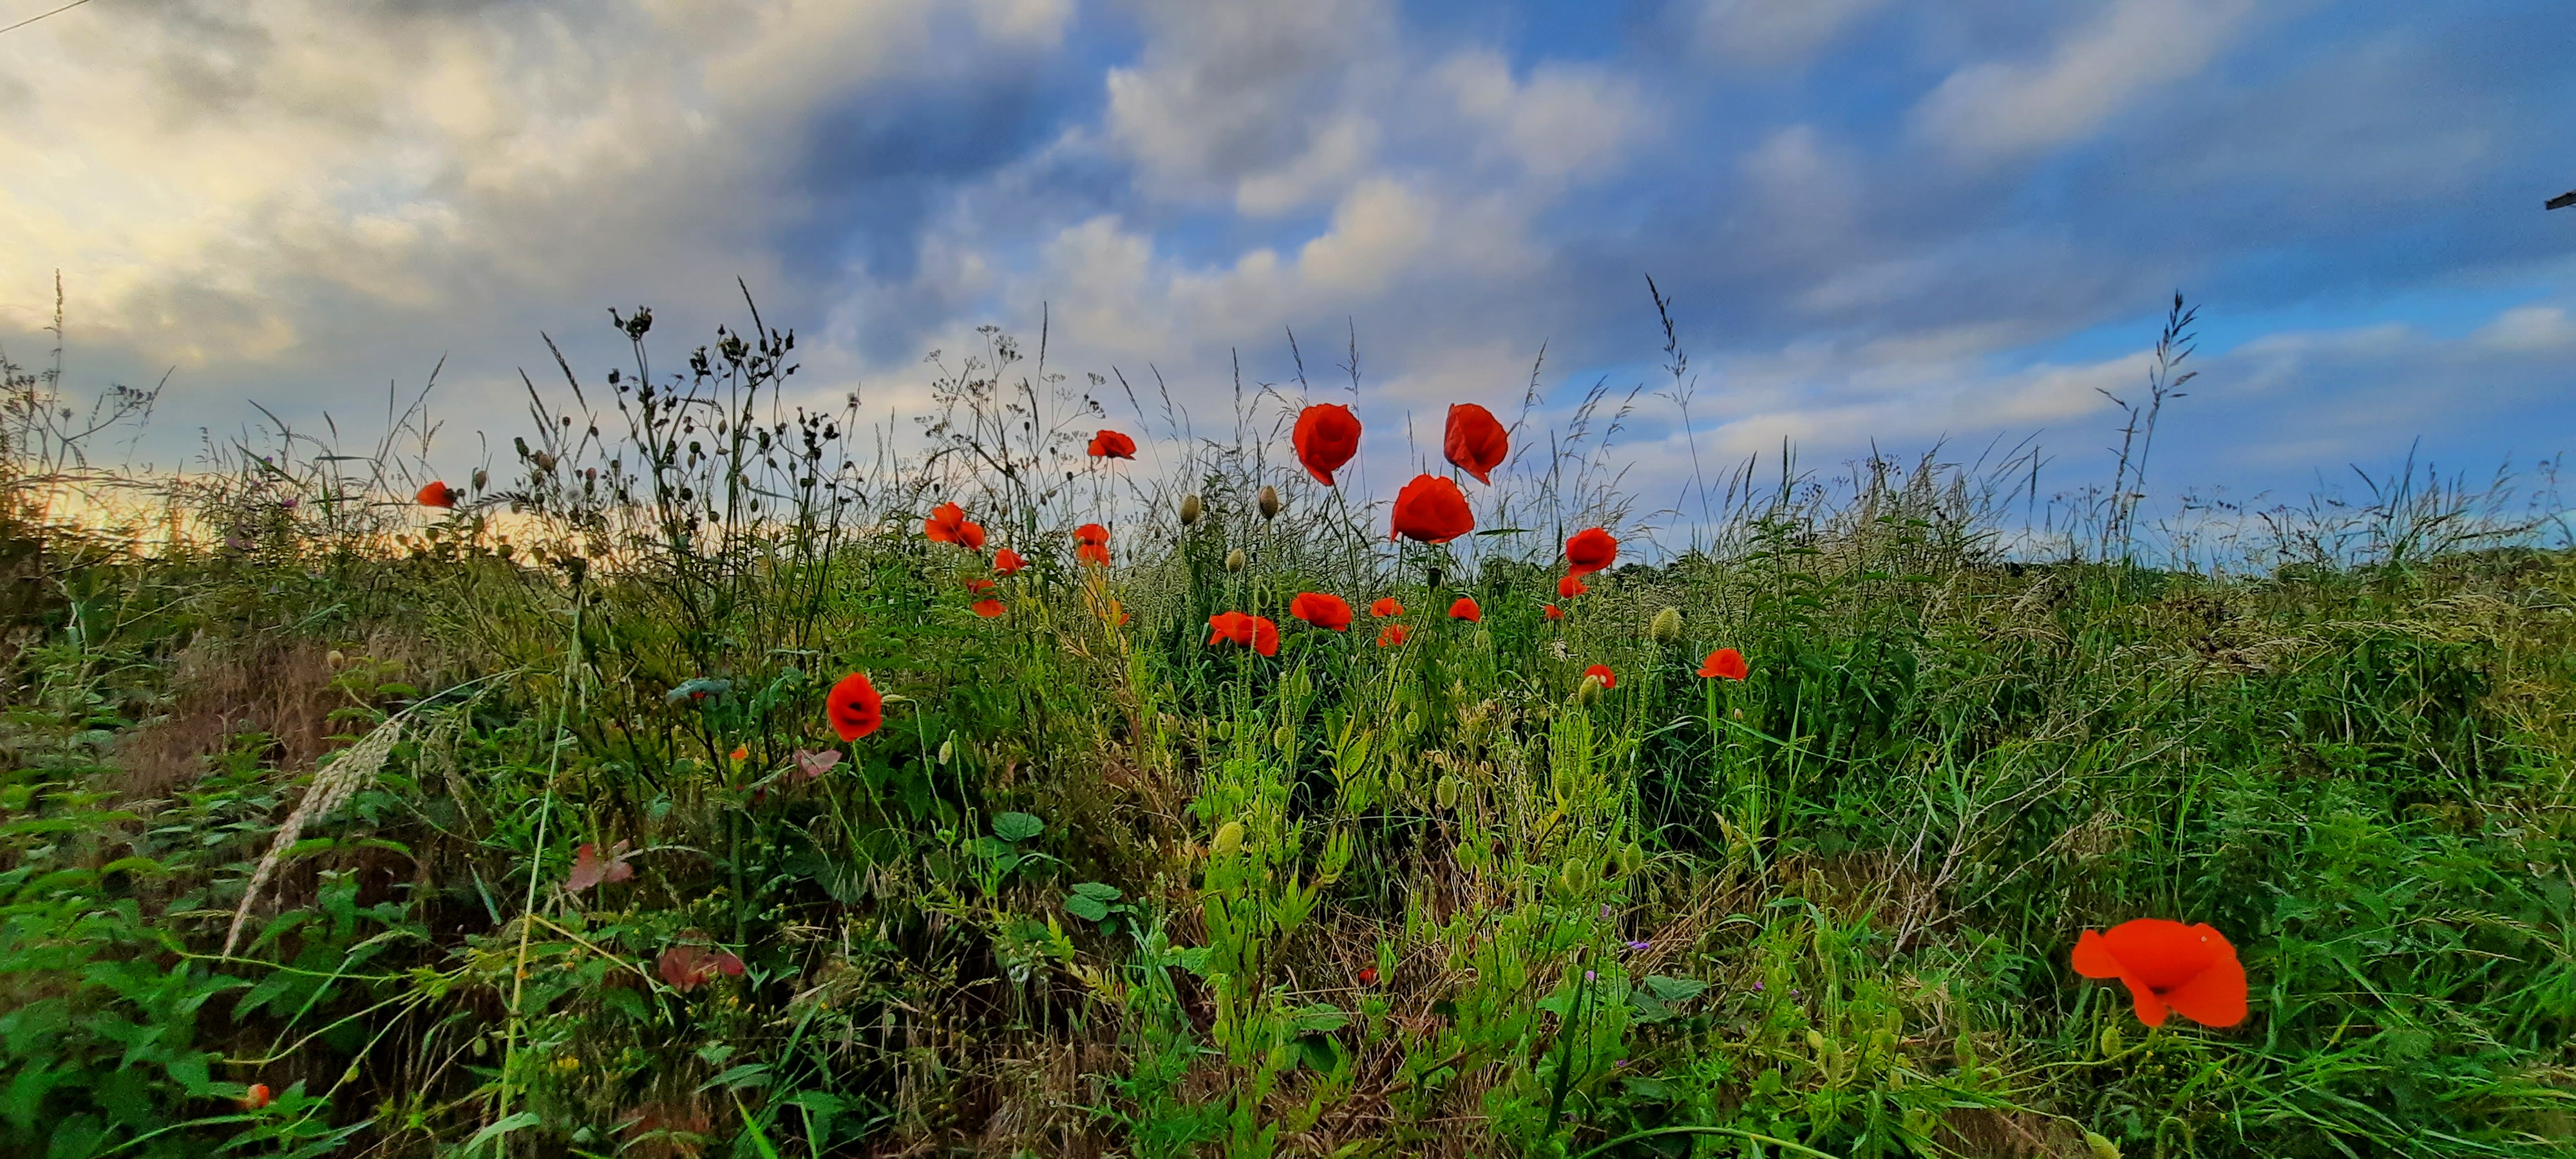 Field of grass with poppies